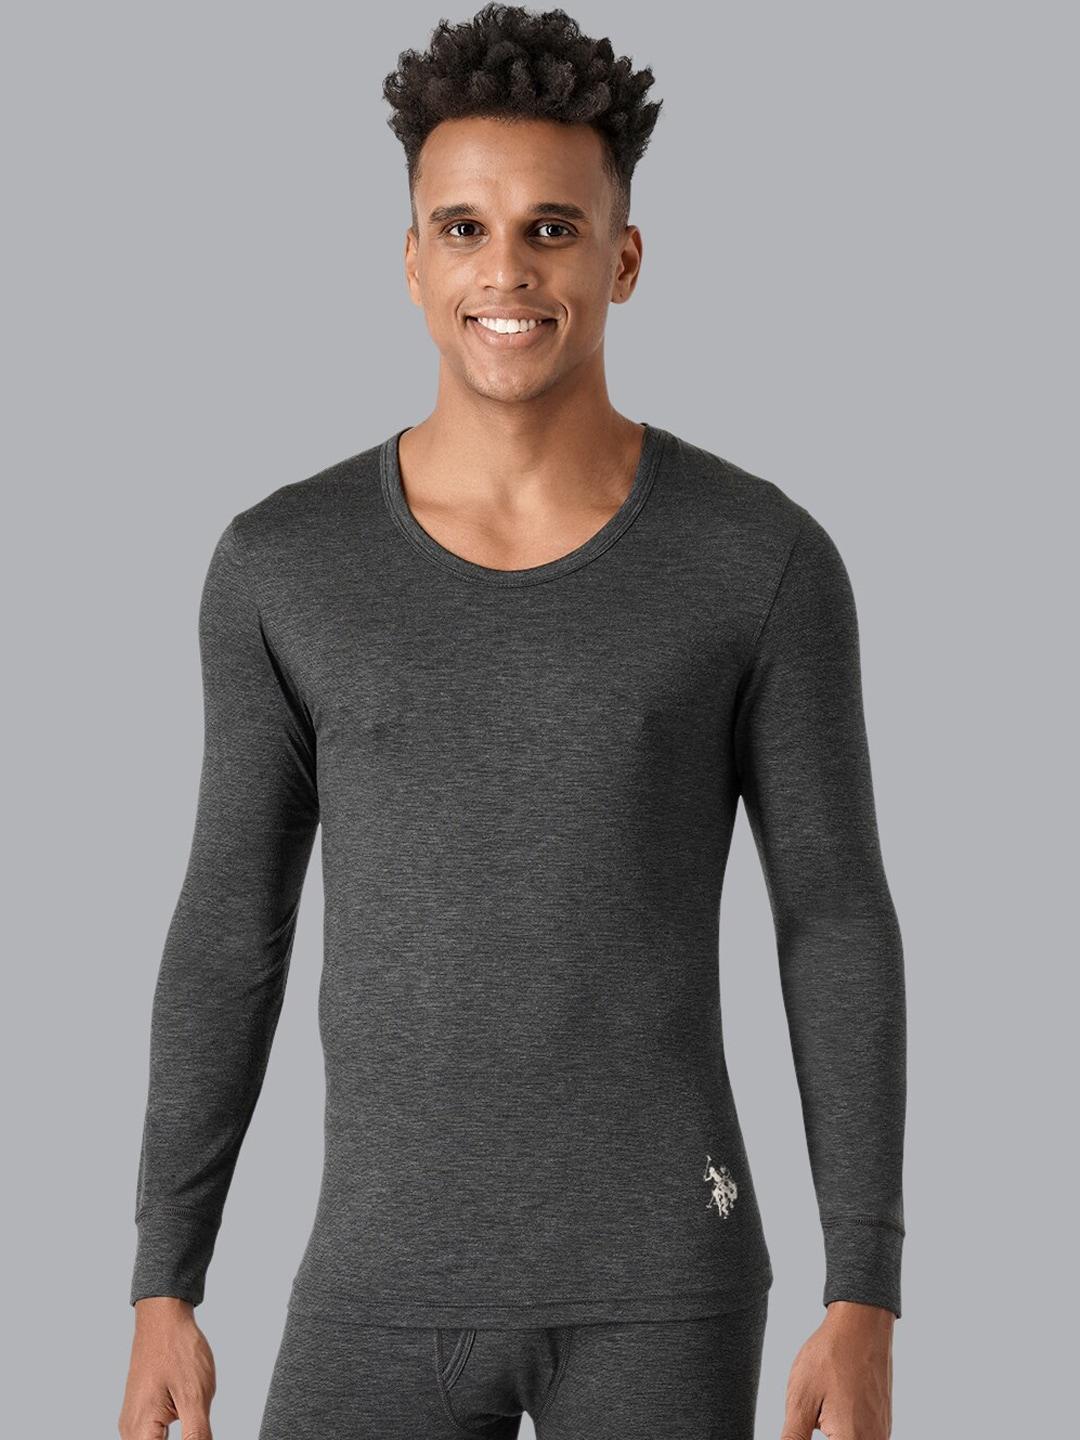 u.s. polo assn. men grey solid thermal top